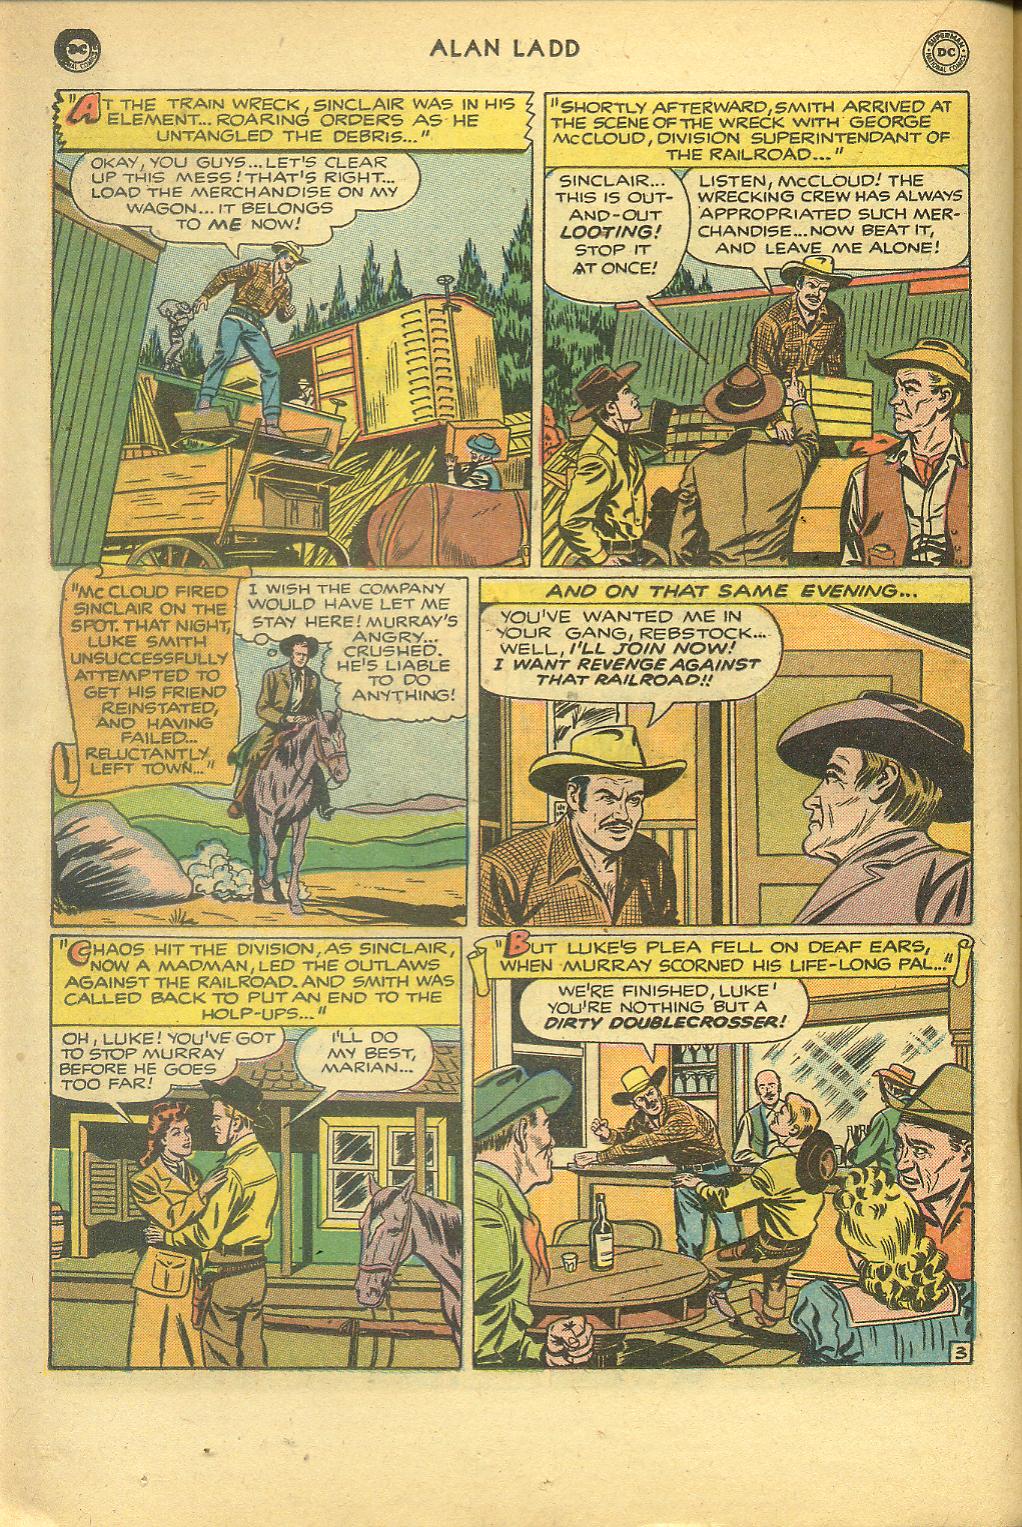 Read online Adventures of Alan Ladd comic -  Issue #3 - 32